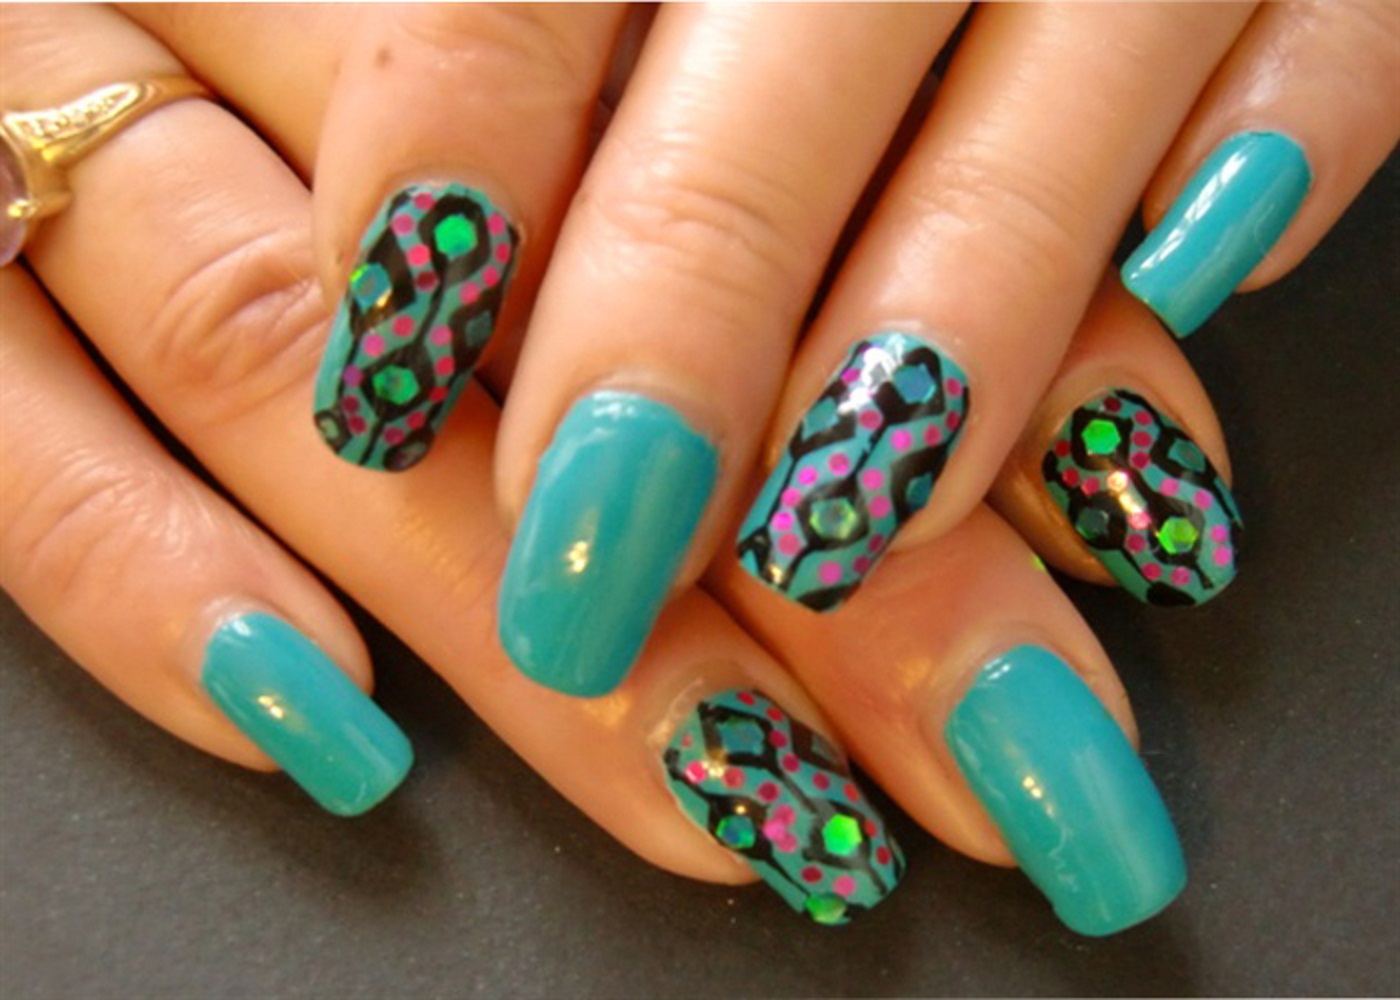 8. "Green and Blue Plaid Nail Art Design" - wide 4